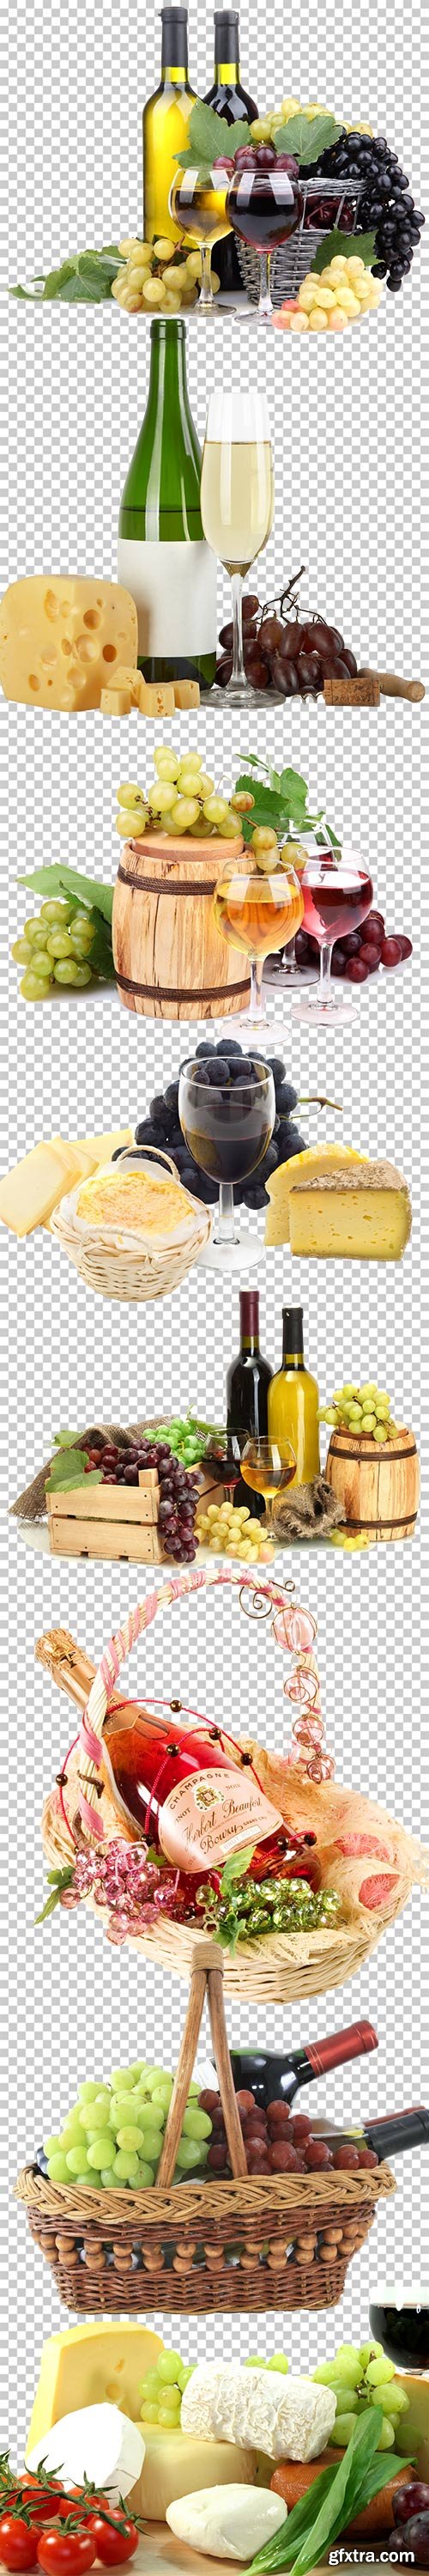 Wine, cheese, grapes – still life on a transparent background